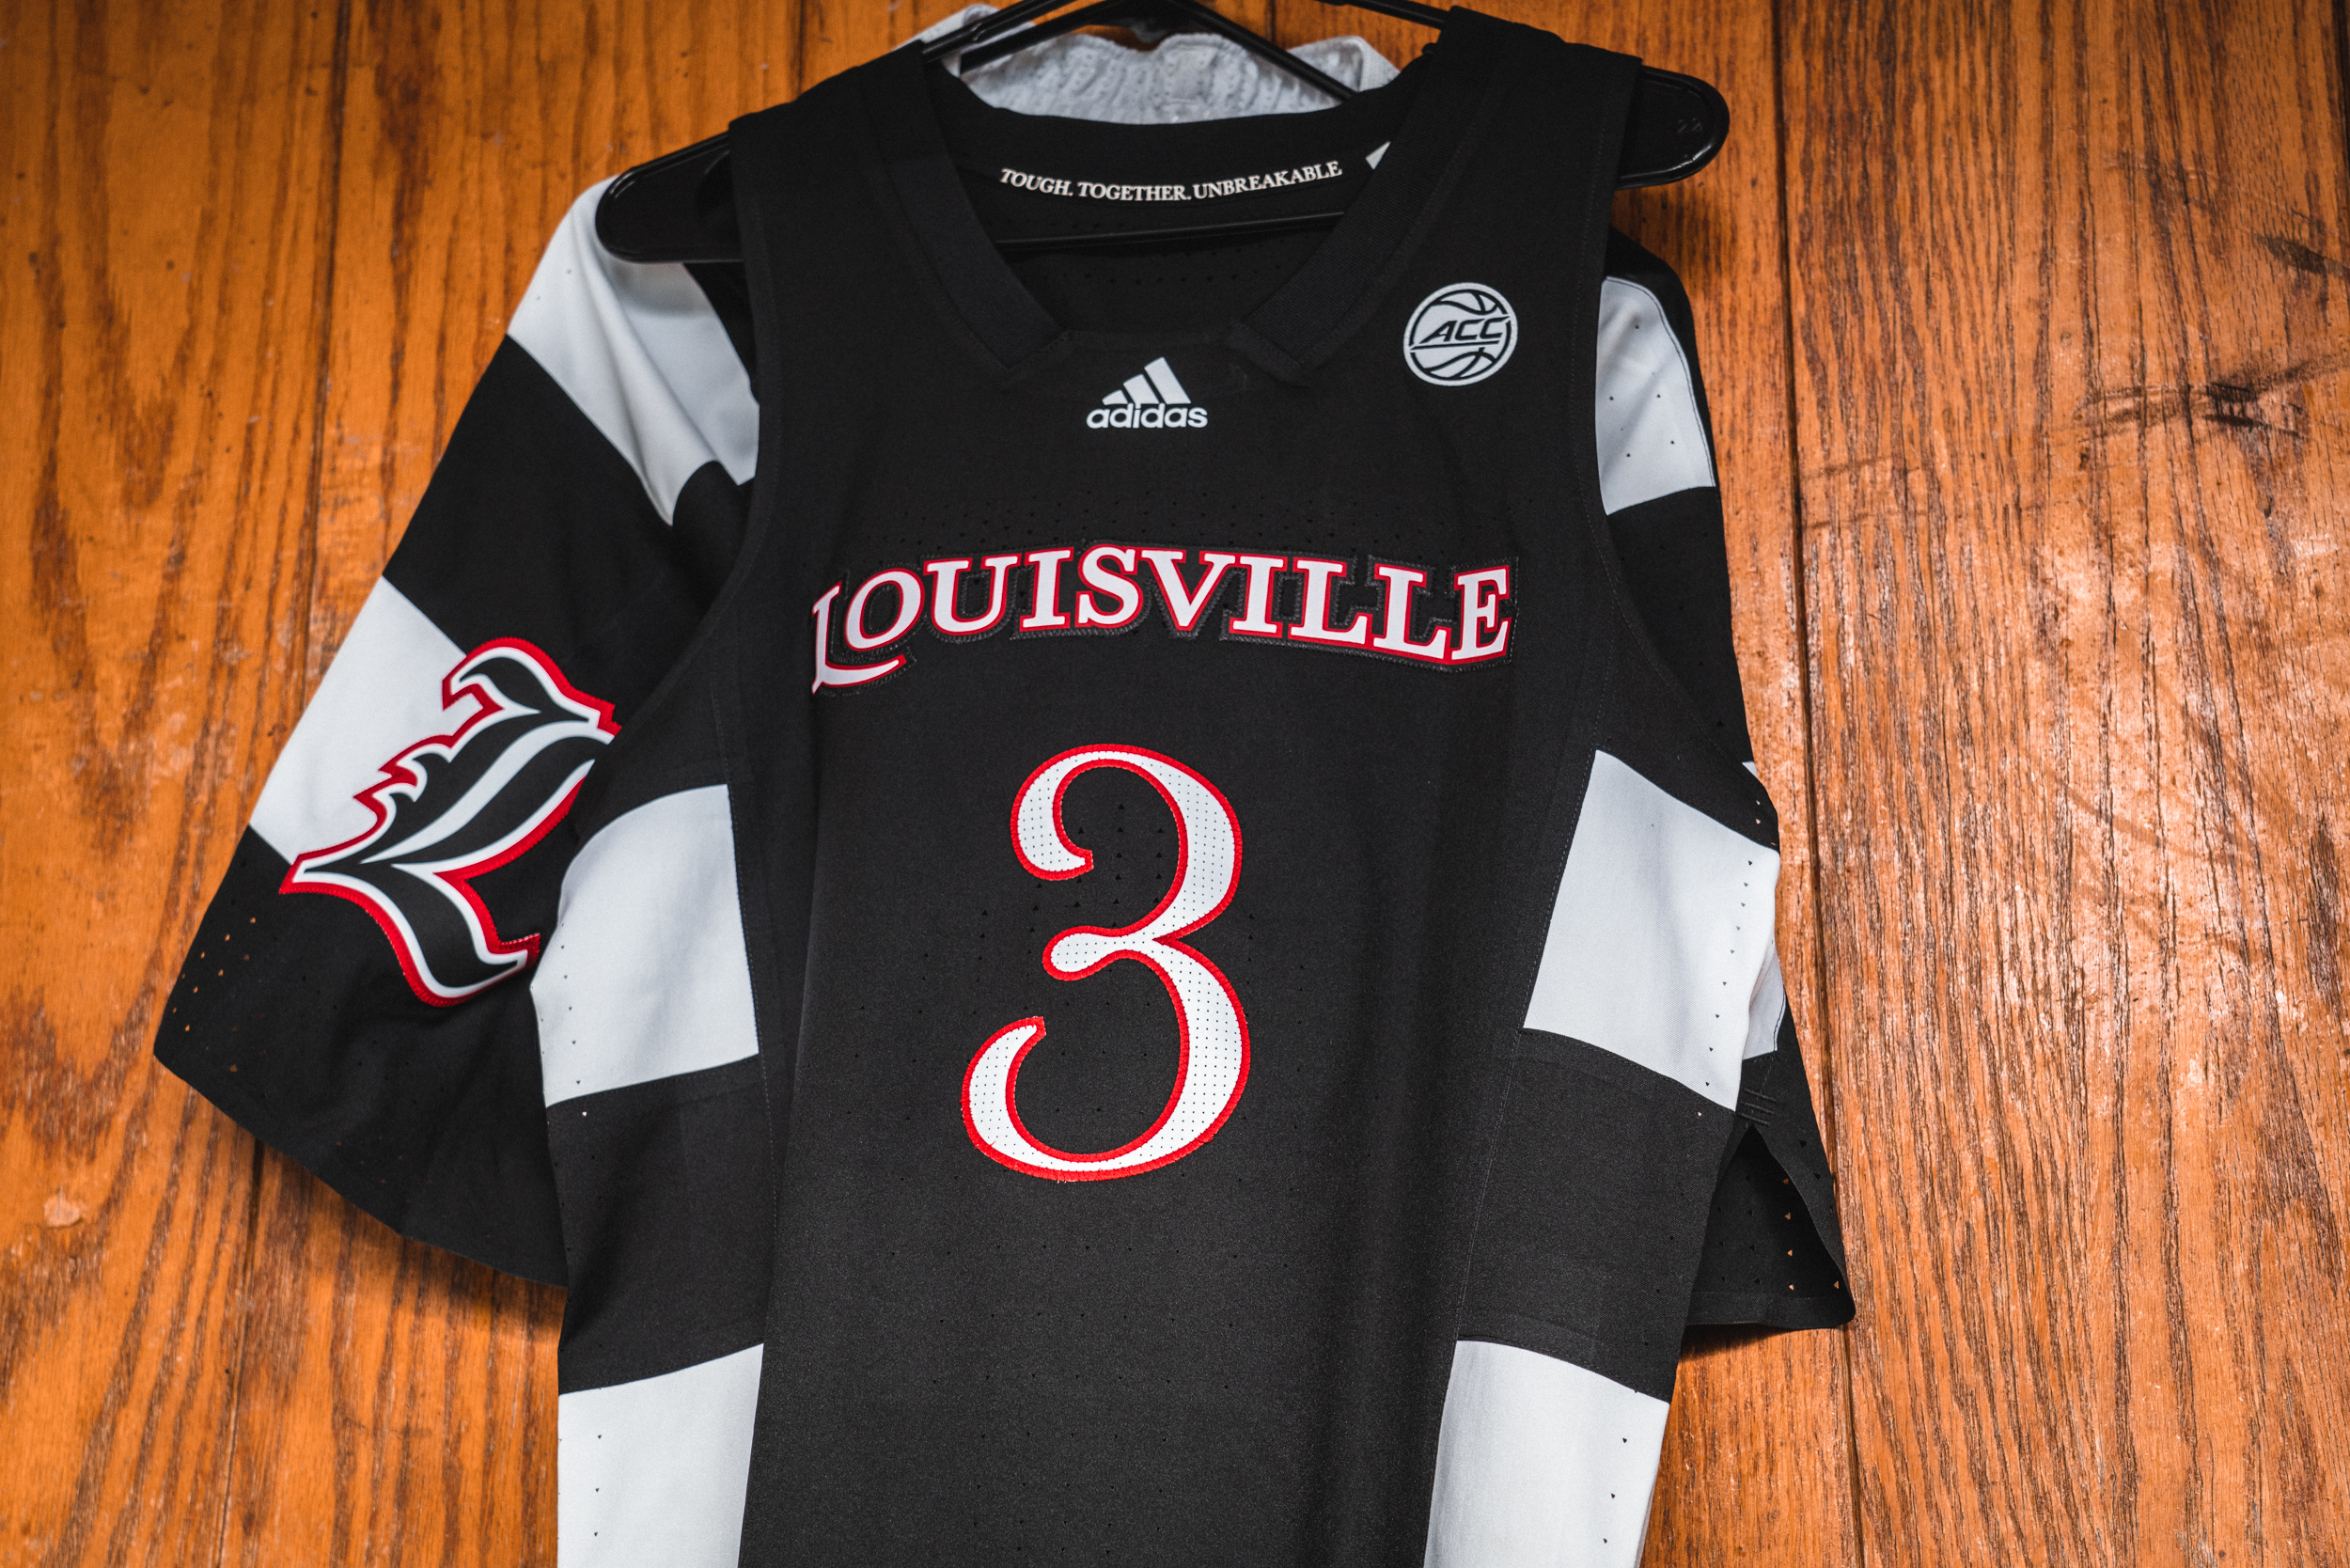 Louisville Men's Basketball on X: Today's uniforms are inspired